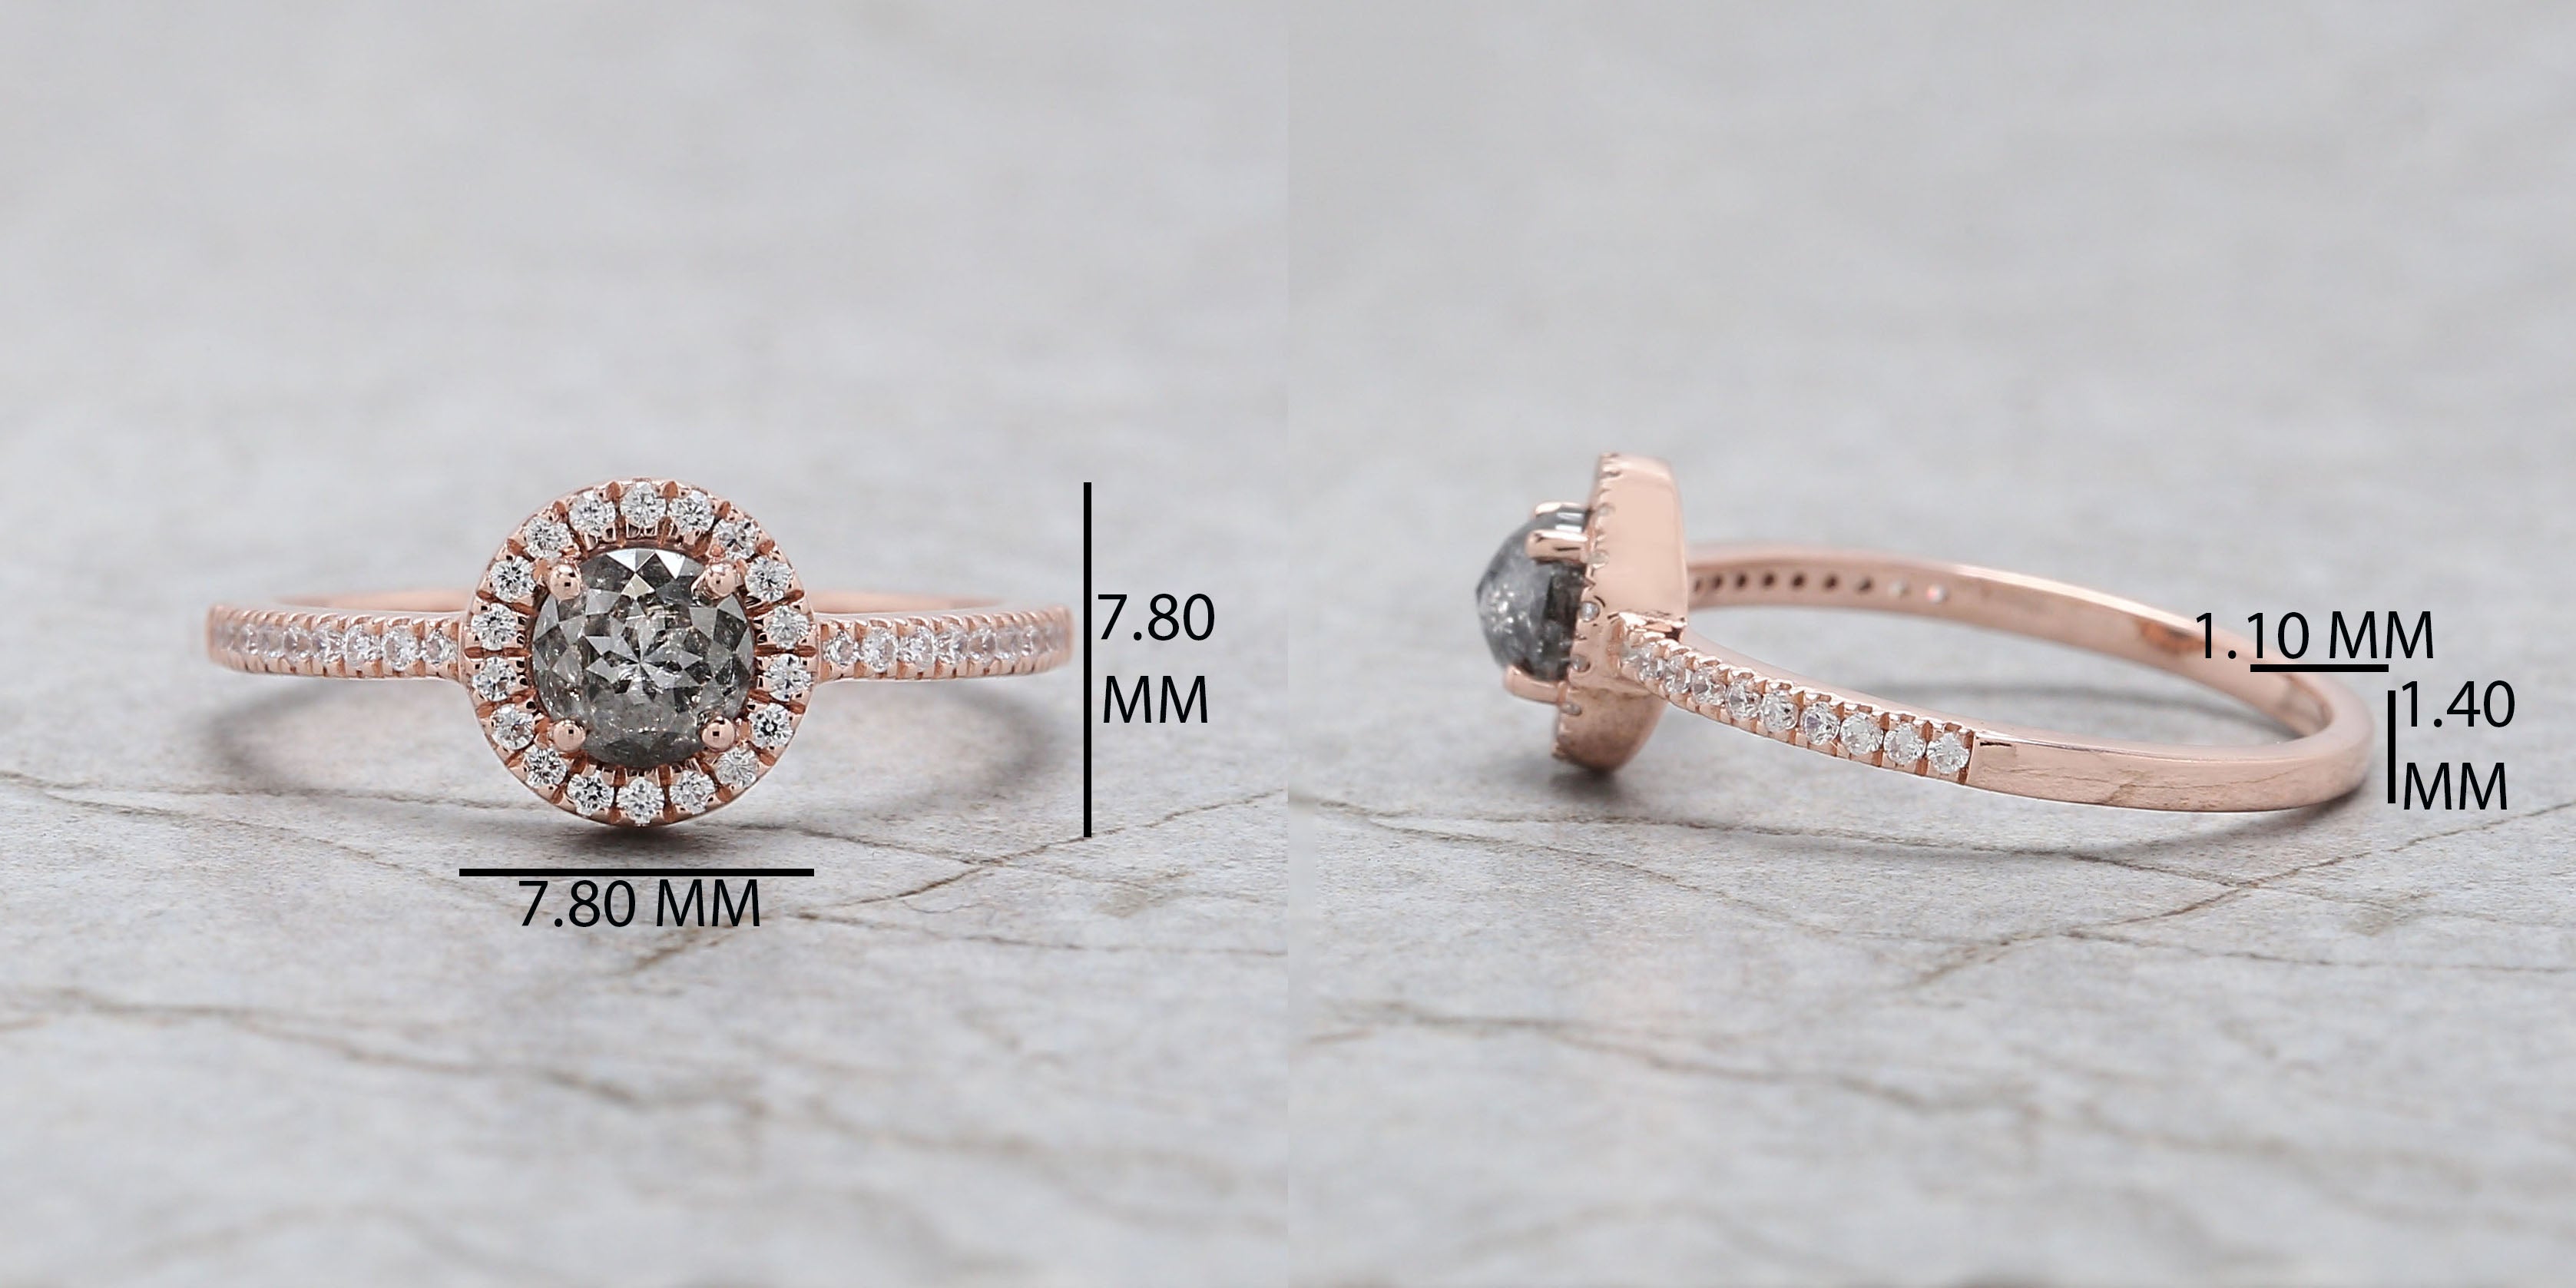 Round Rose Cut Salt And Pepper Diamond Ring 0.61 Ct 4.80 MM Round Diamond Ring 14K Rose Gold Silver Engagement Ring Gift For Her QN9744